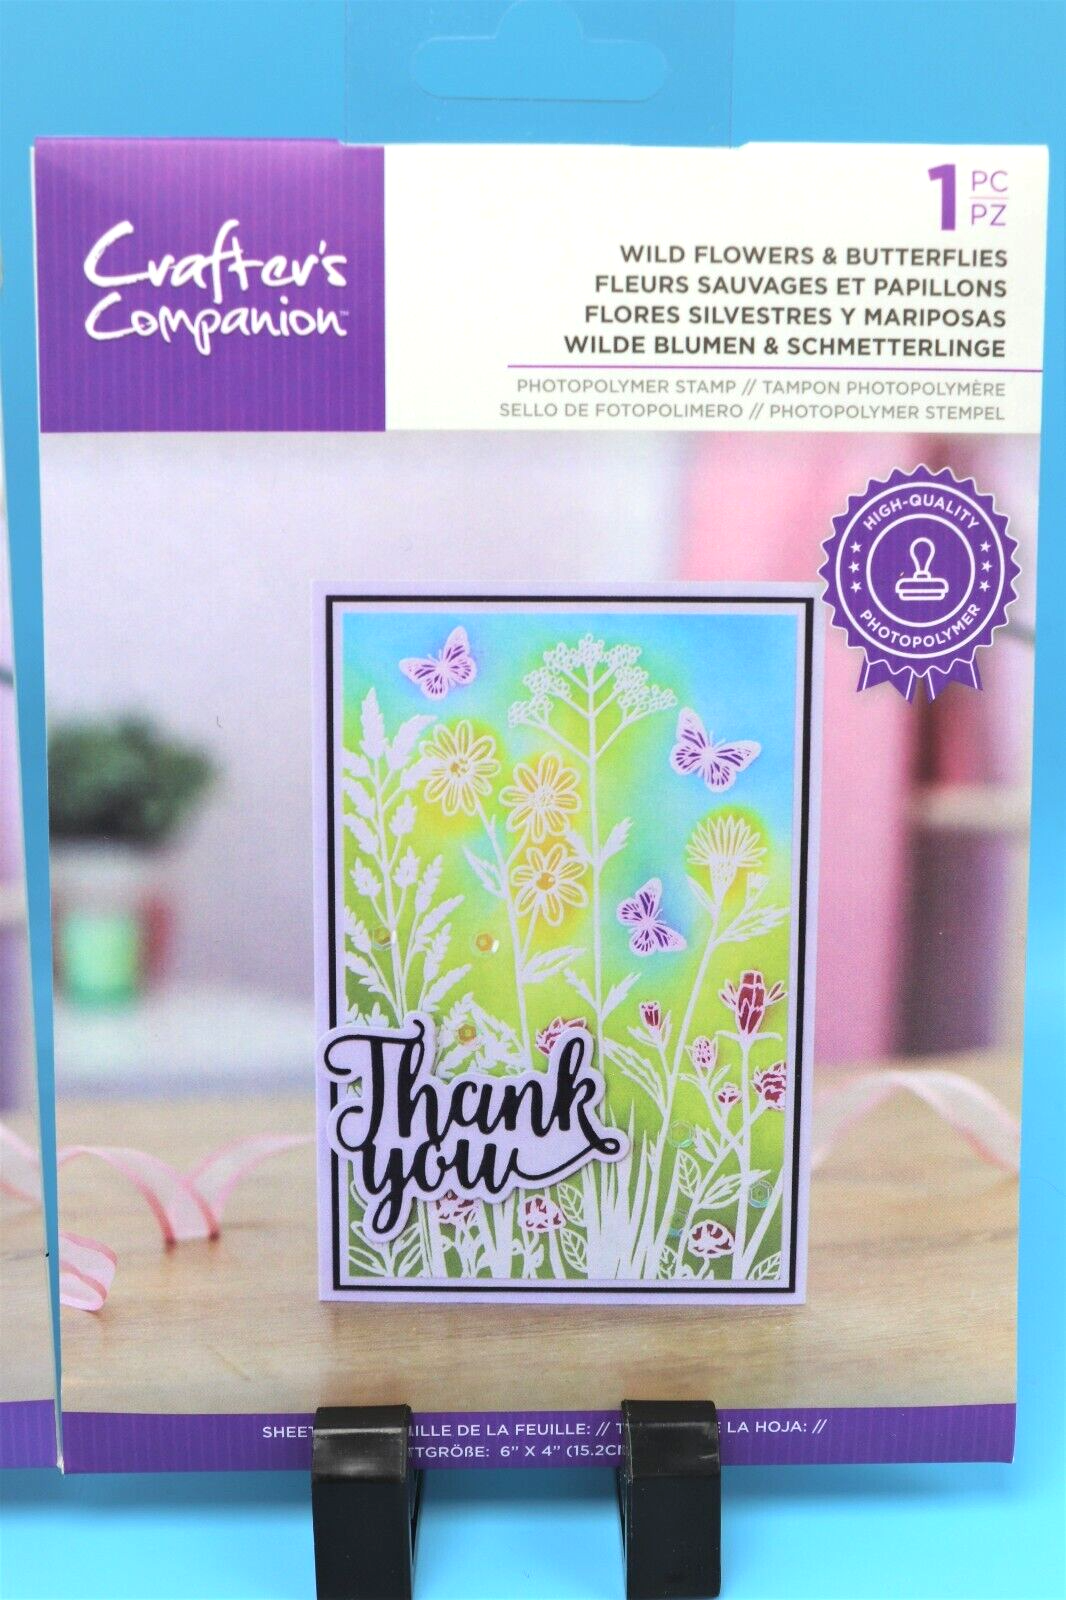 NEW Crafter's Companion Resist Silhouette Photopolymer Stamp Collection Crafter's Companion - фотография #6